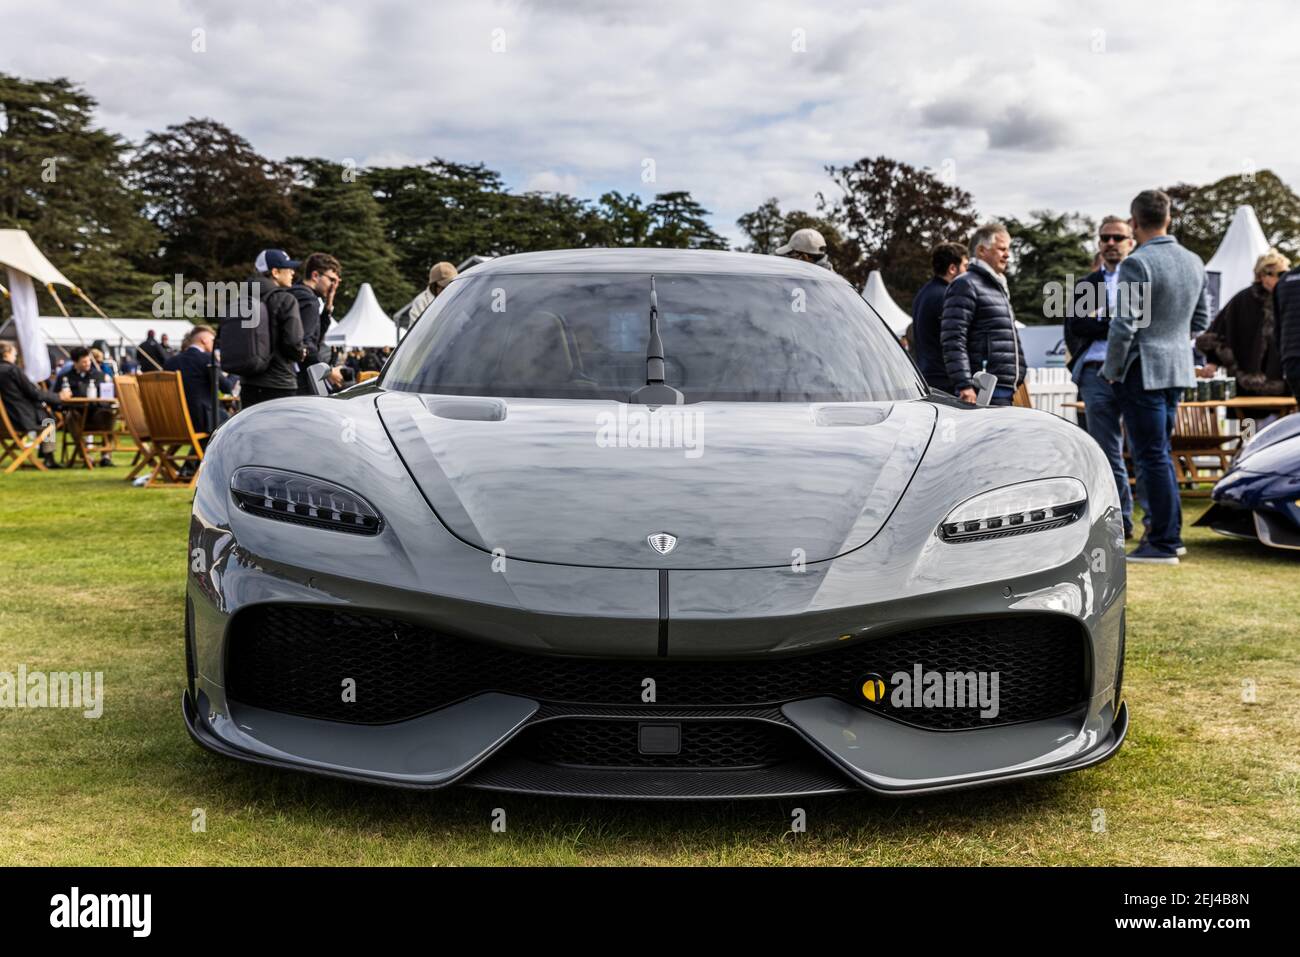 Koenigsegg Gemera on show at the Concours d’Elegance held at Blenheim Palace on the 26 September 2020 Stock Photo